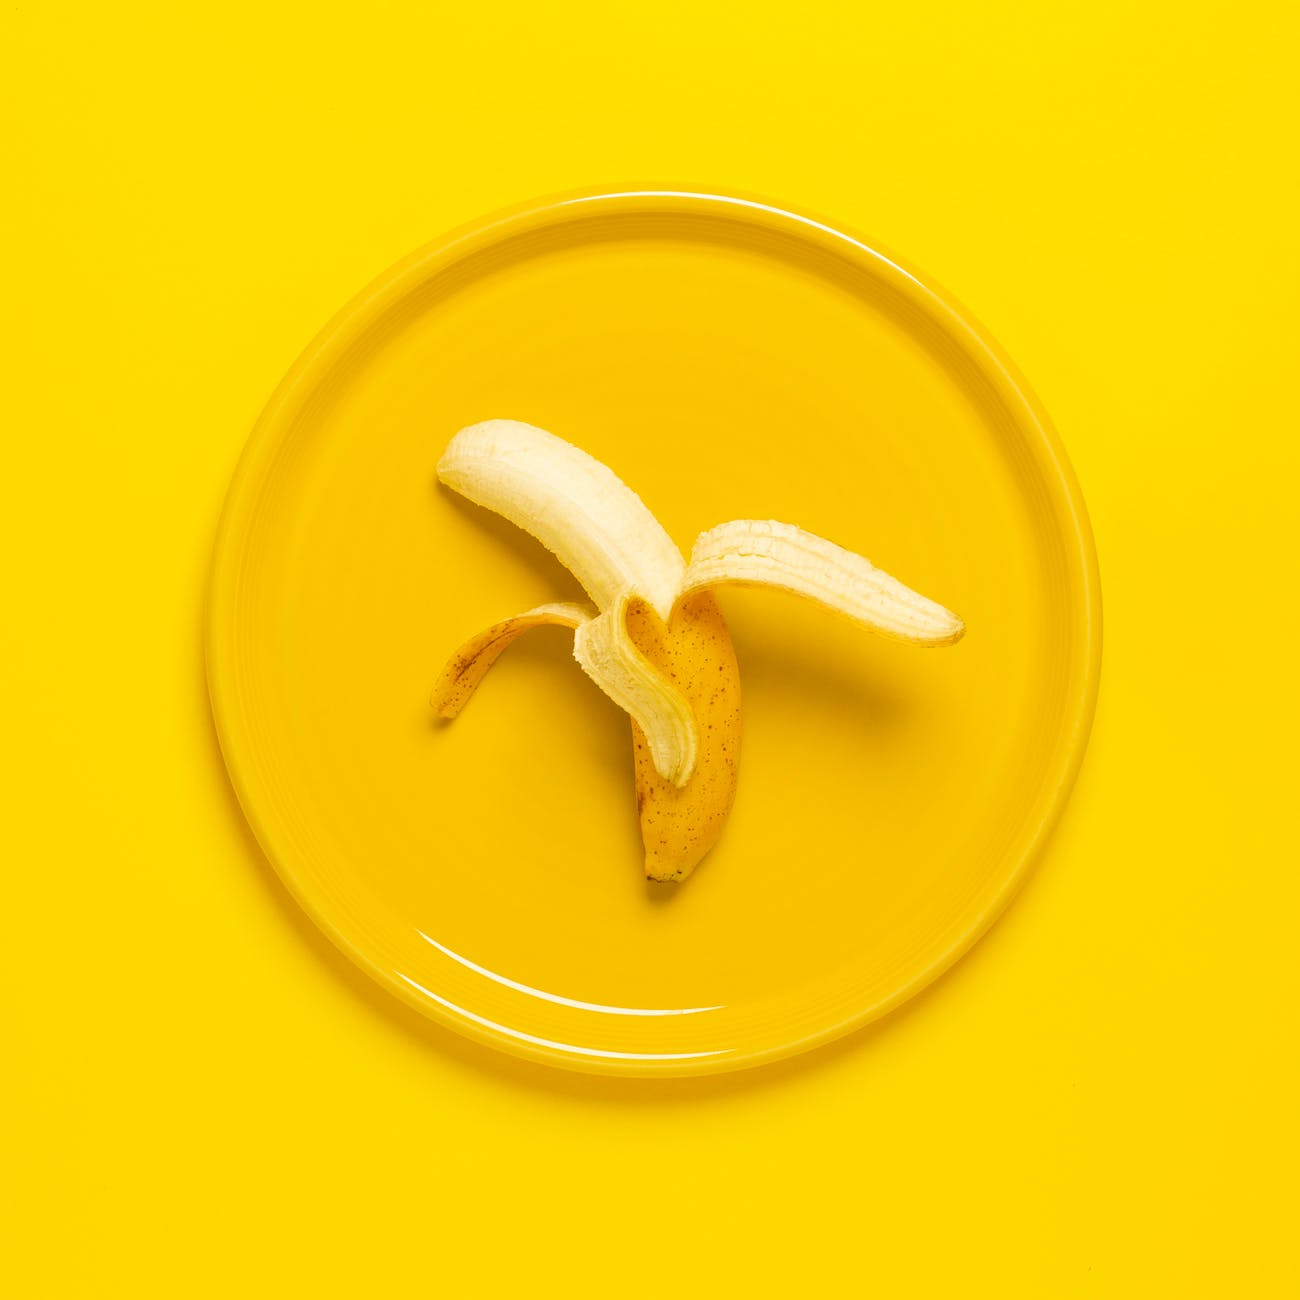 photo of peeled banana on yellow plate and background